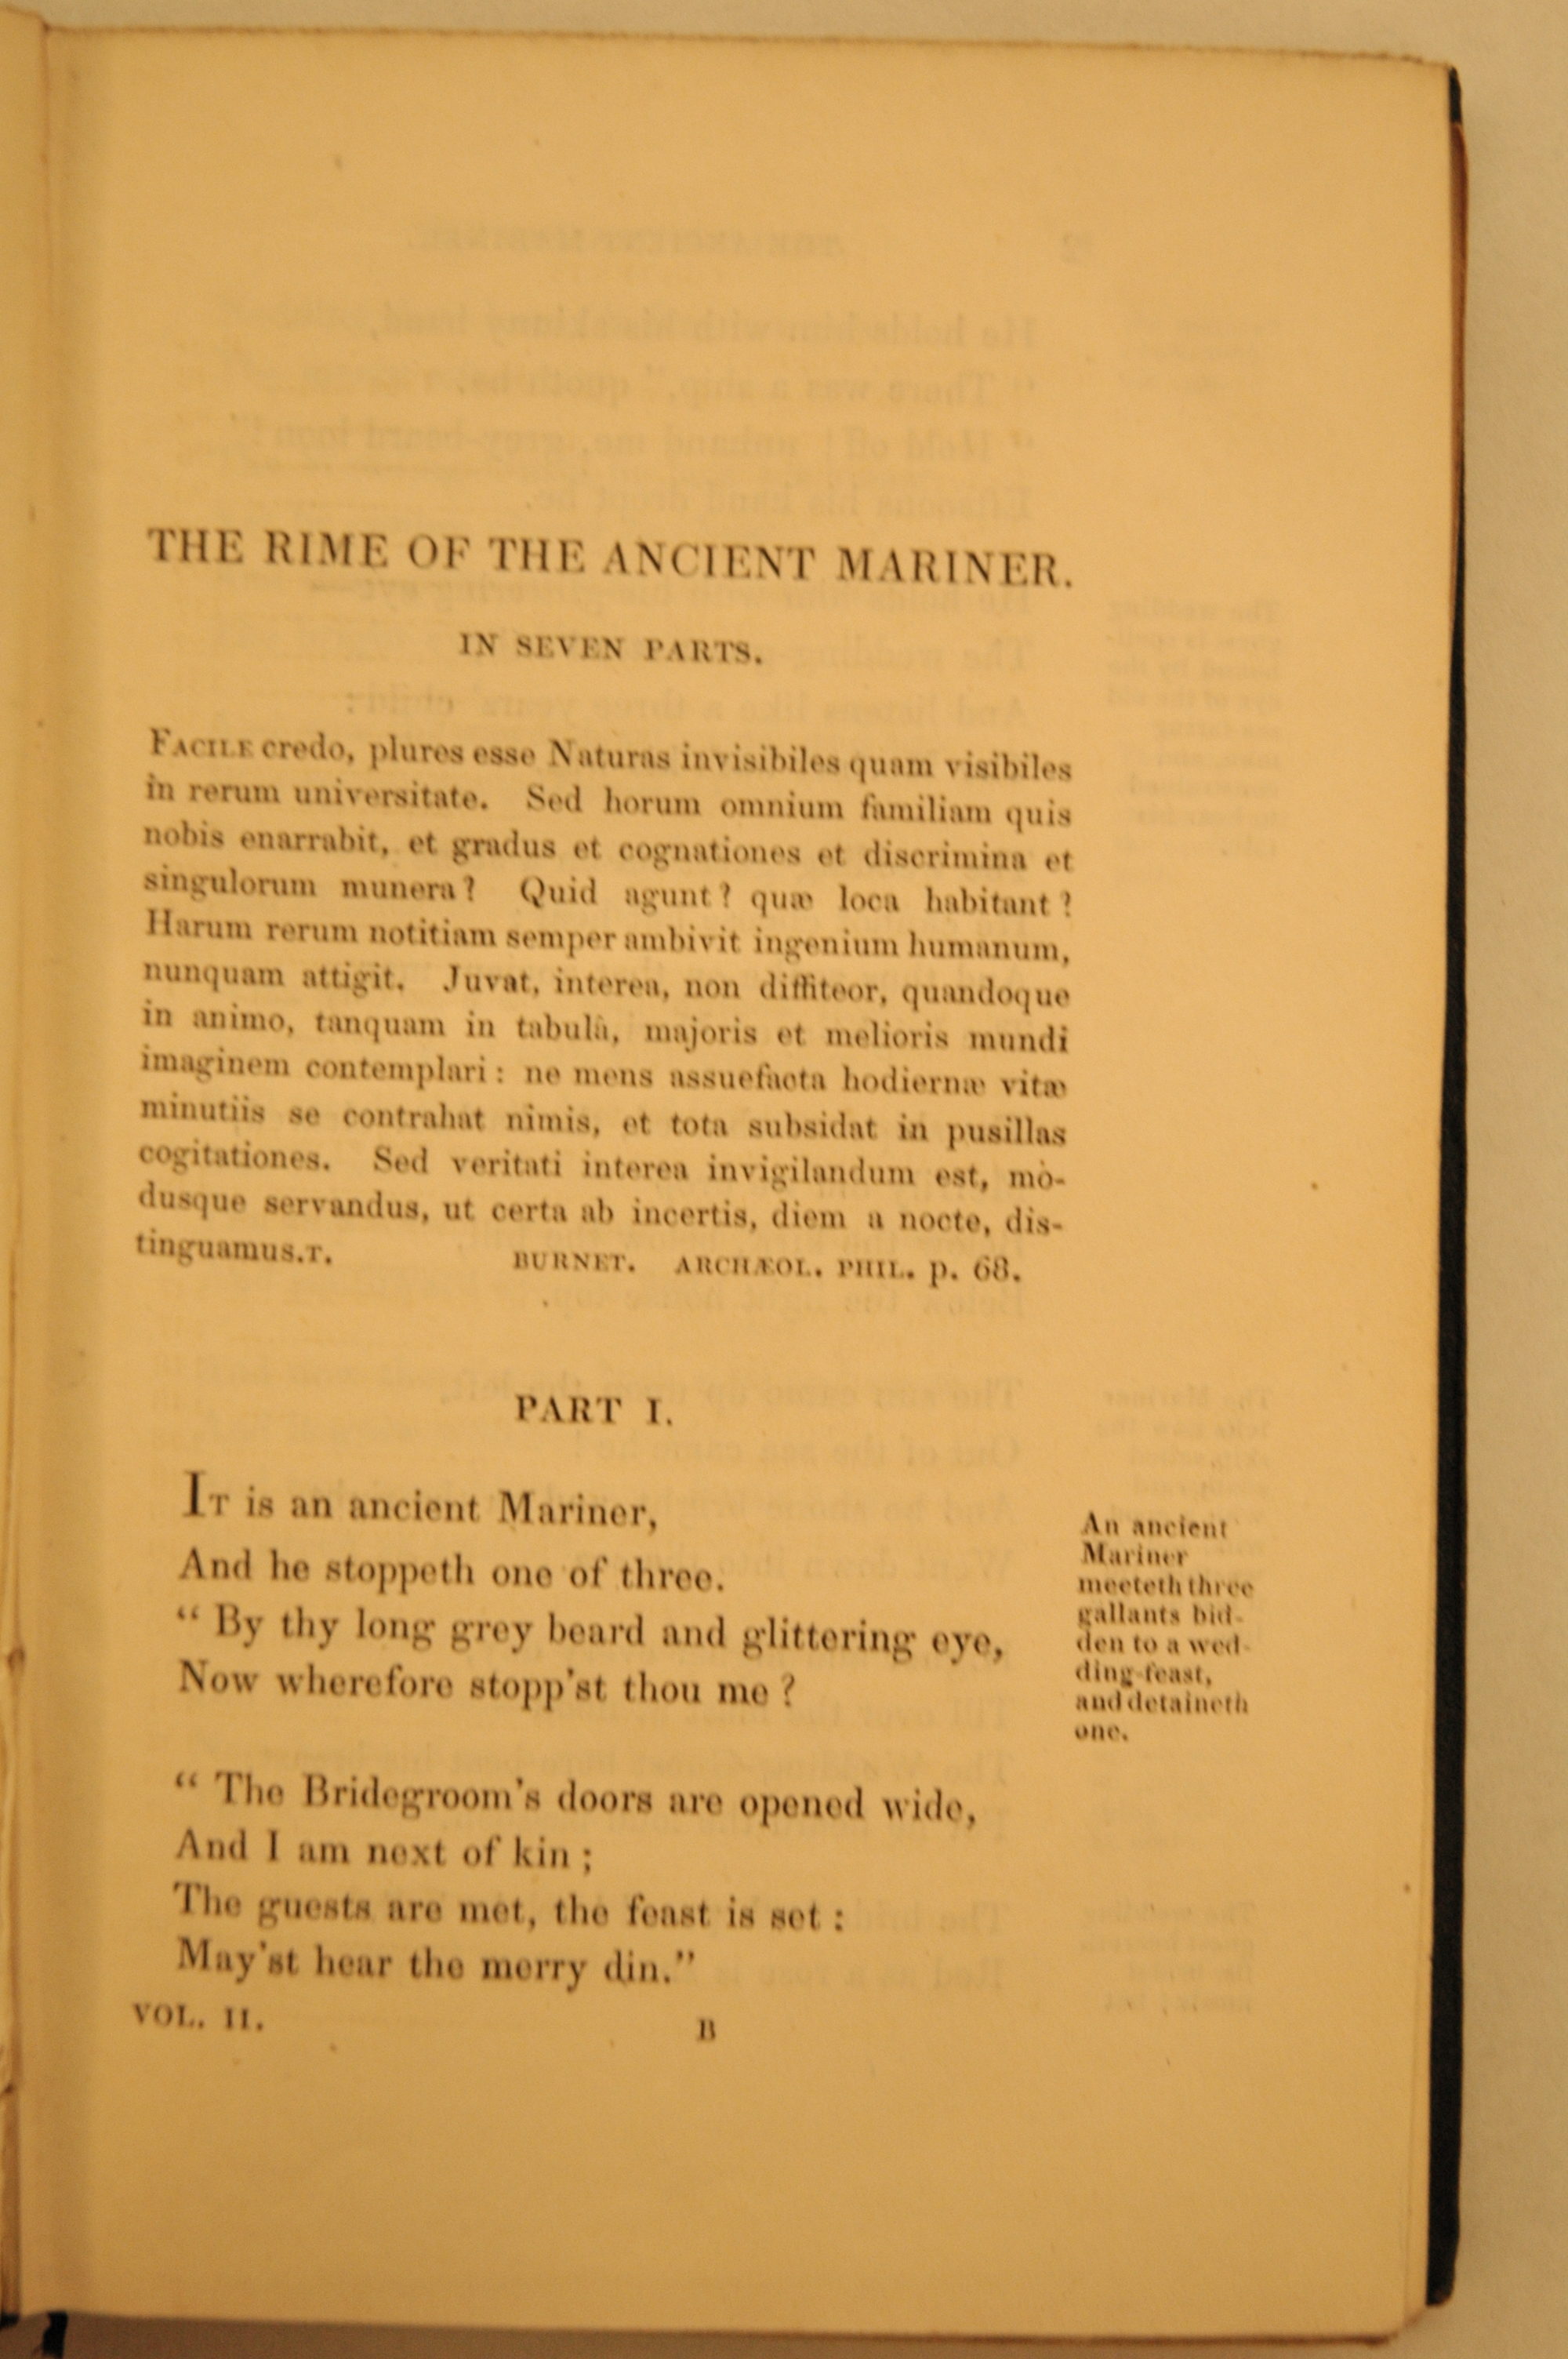 Variations of Coleridge's The Rime of the Ancient Mariner – 1798